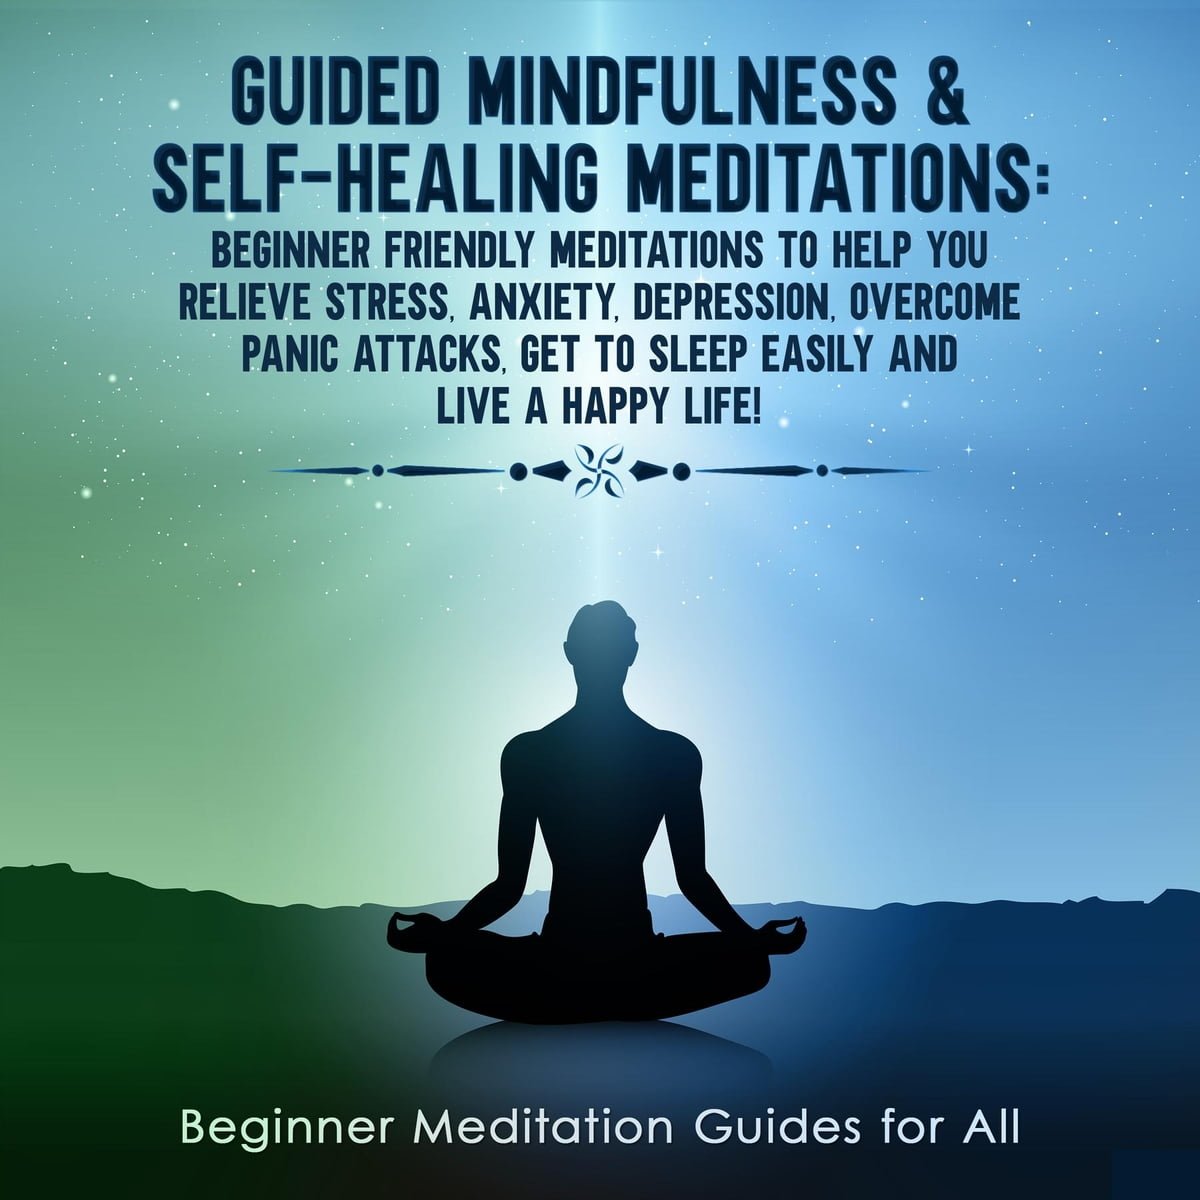 guided-mindfulness-self-healing-meditations-beginner-friendly-meditations-to-help-you-relieve-stress-anxiety-depression-overcome-panic-attacks-get-to-sleep-easily-and-live-a-happy-life